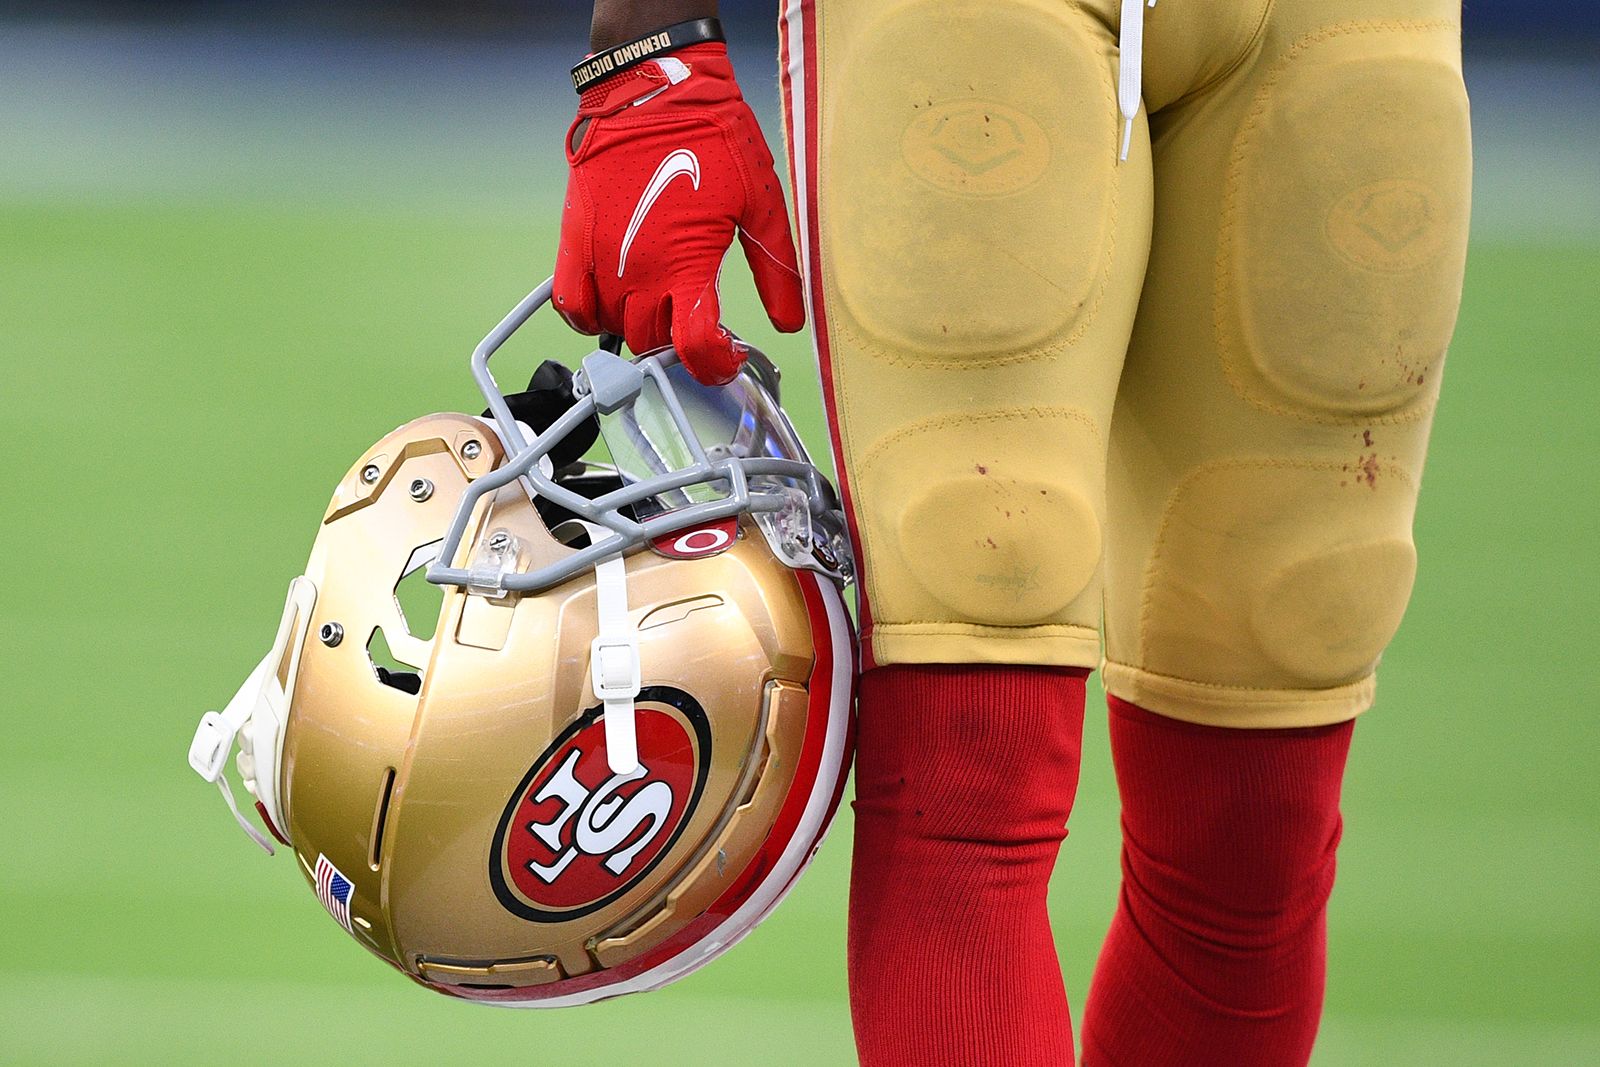 San Francisco 49ers confirm network security incident